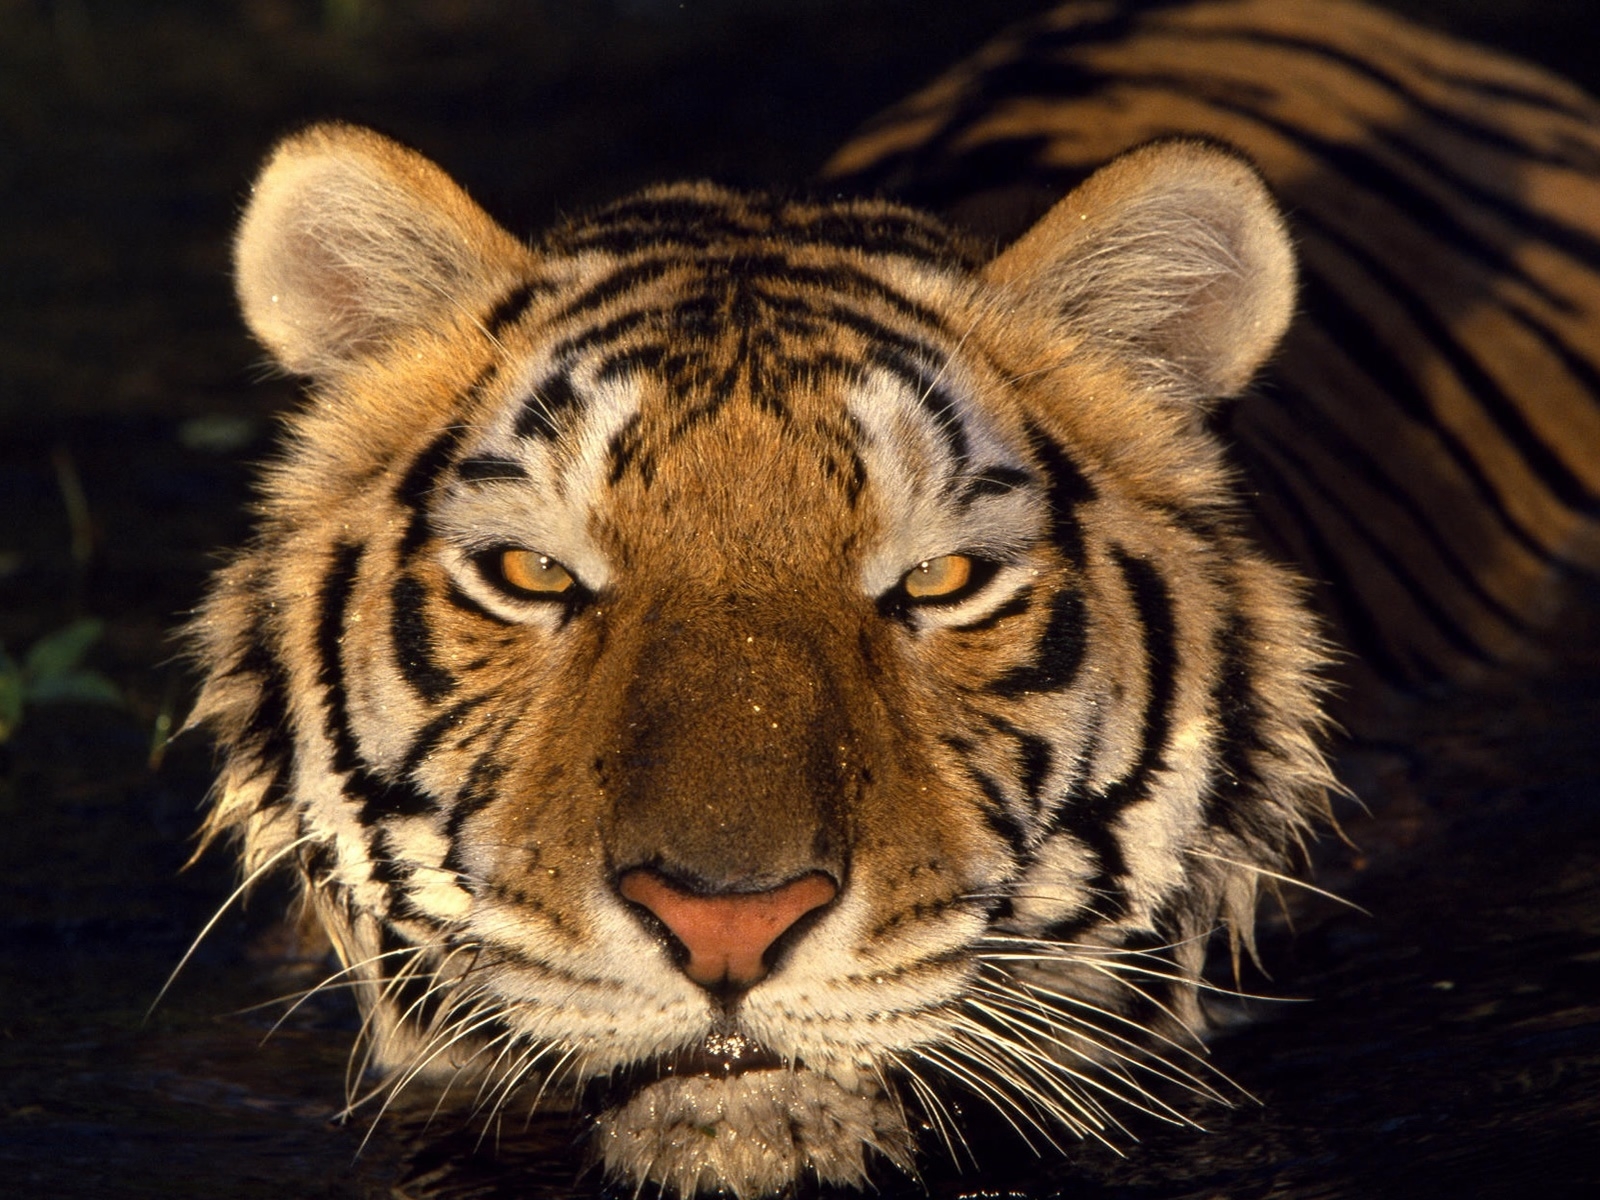 Tiger Head for 1600 x 1200 resolution